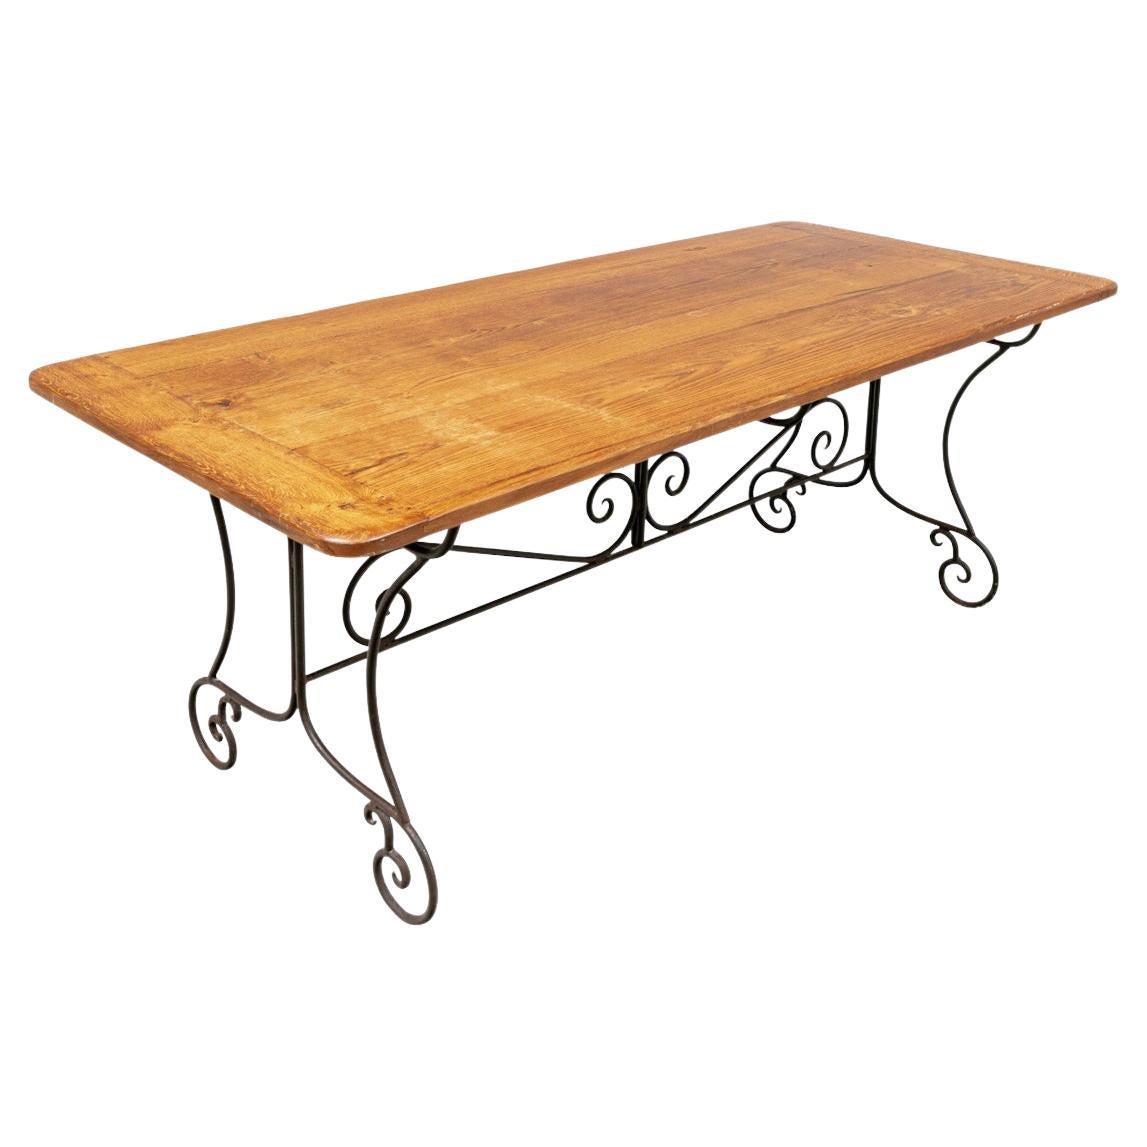 French Industrial Style Dining/ Work Table with Breadboard Top For Sale